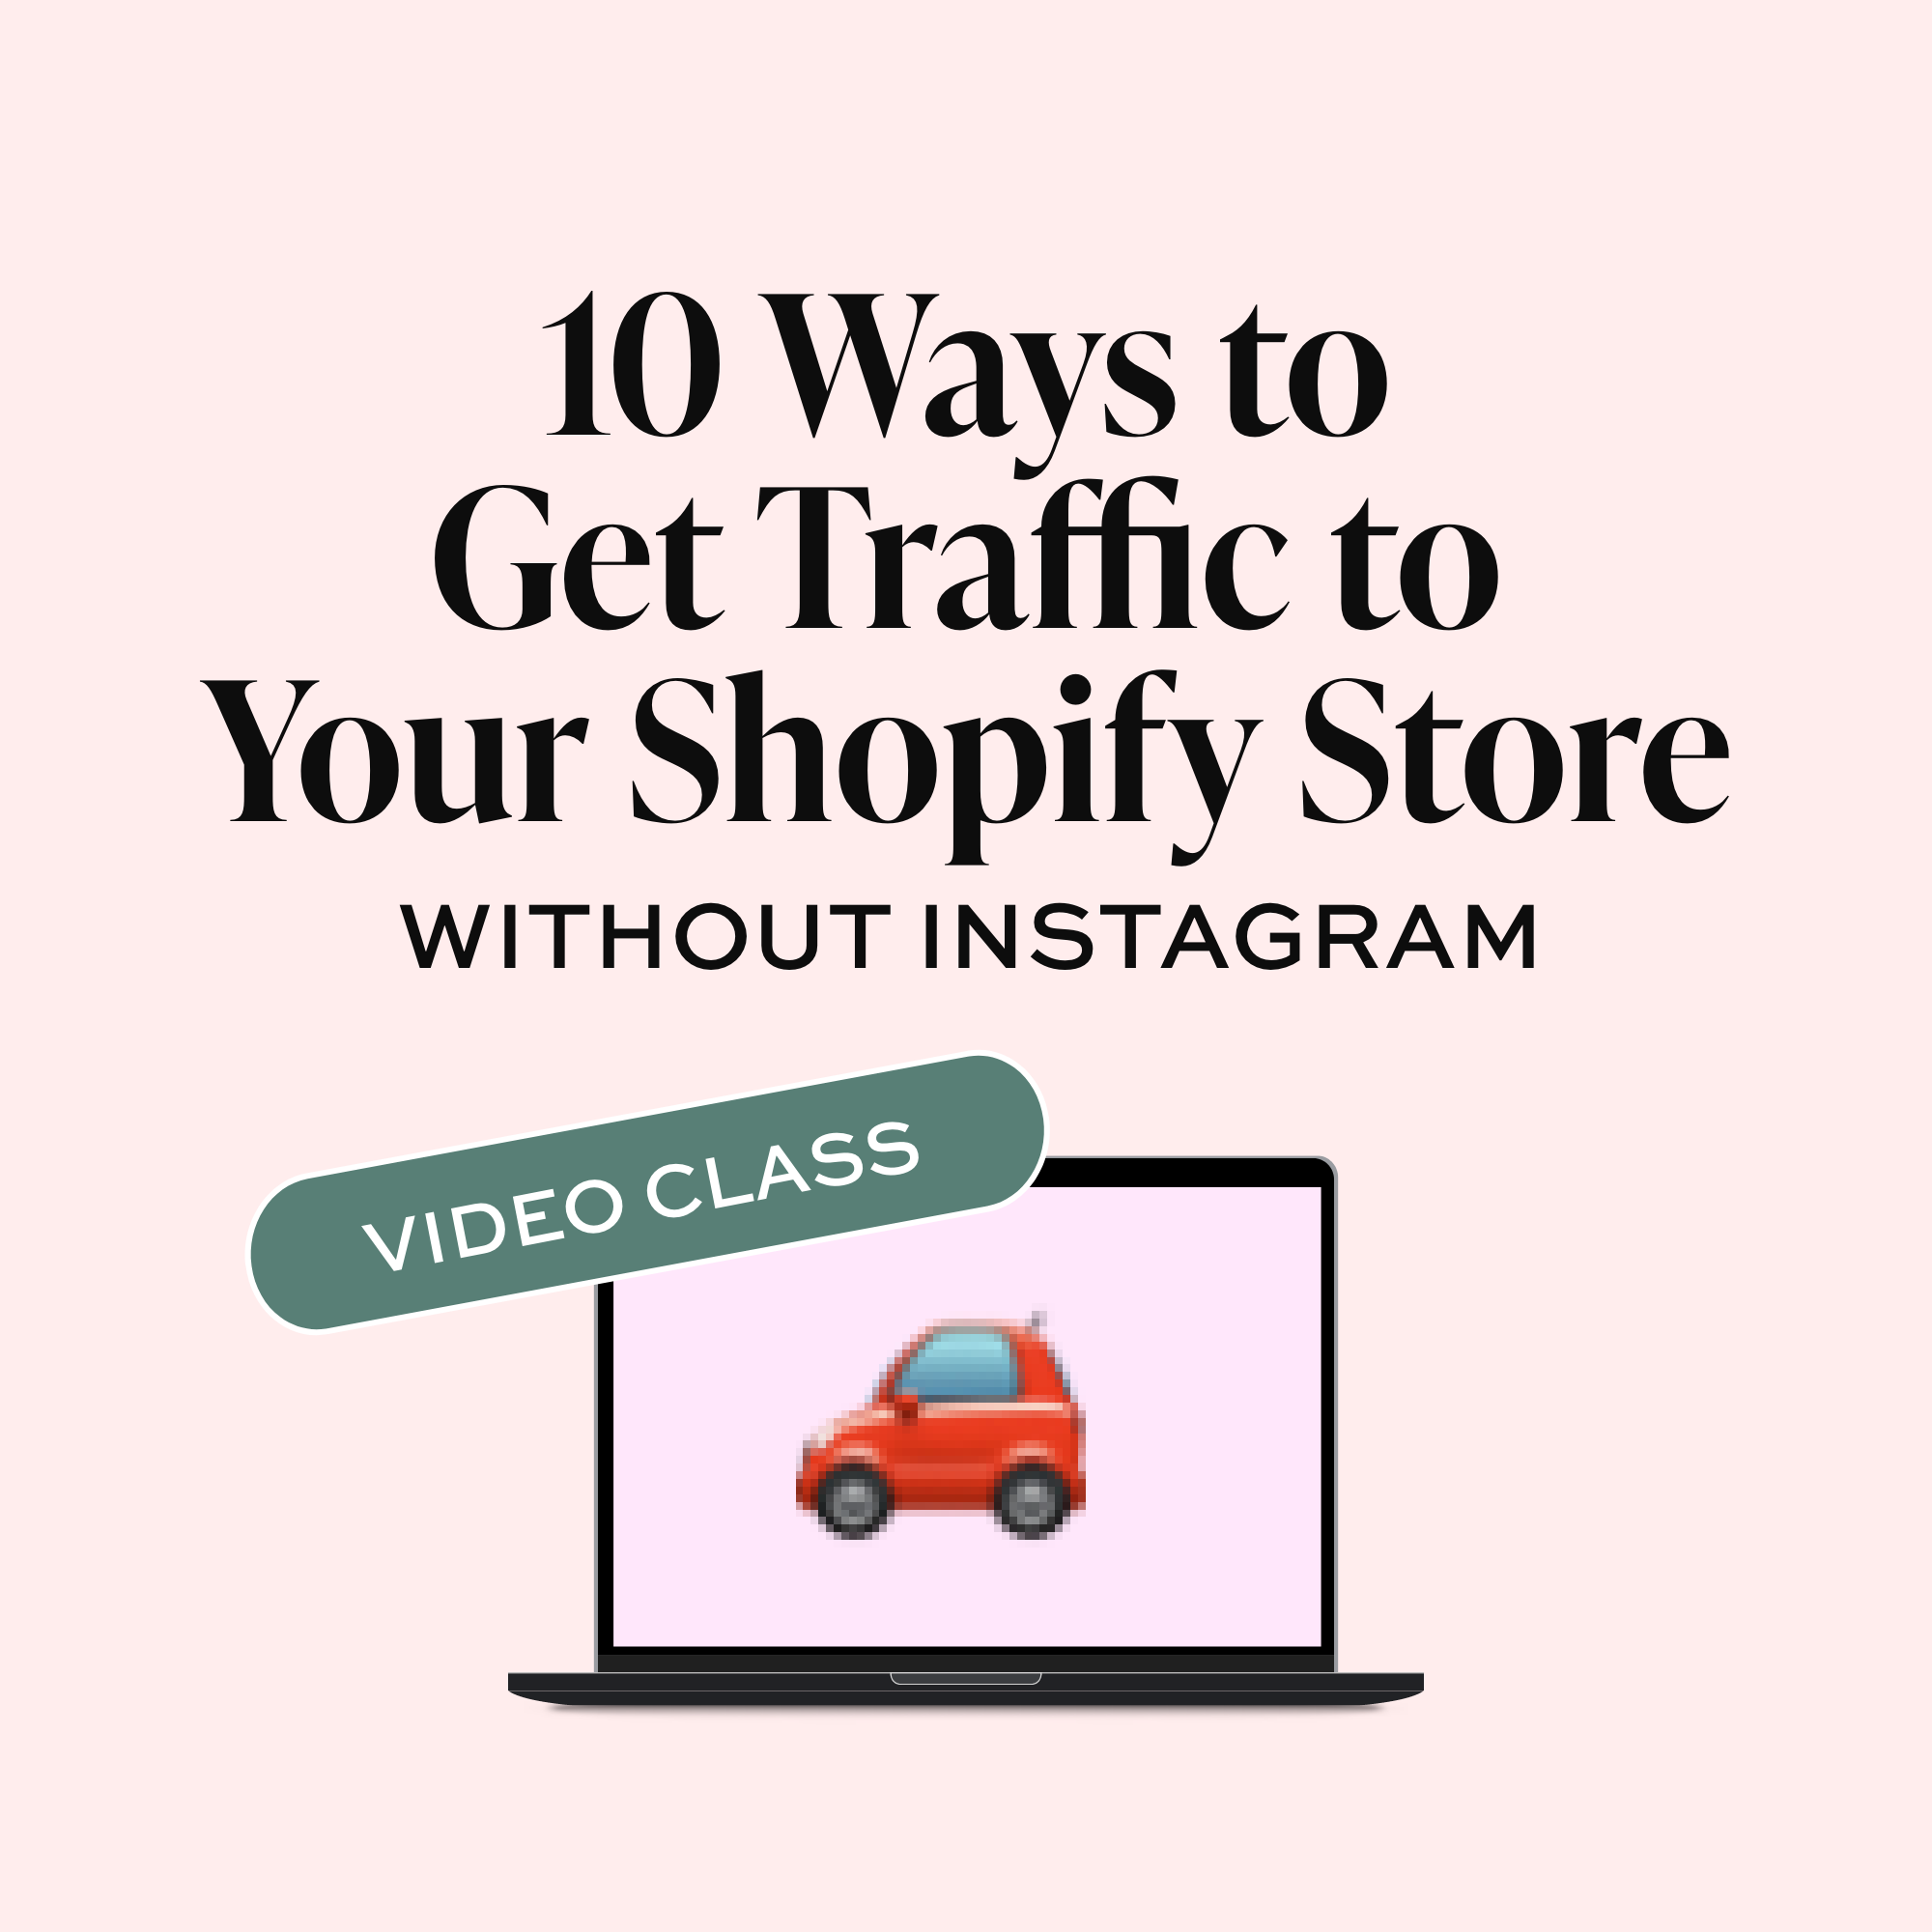 10 ways to get traffic to your shopify store